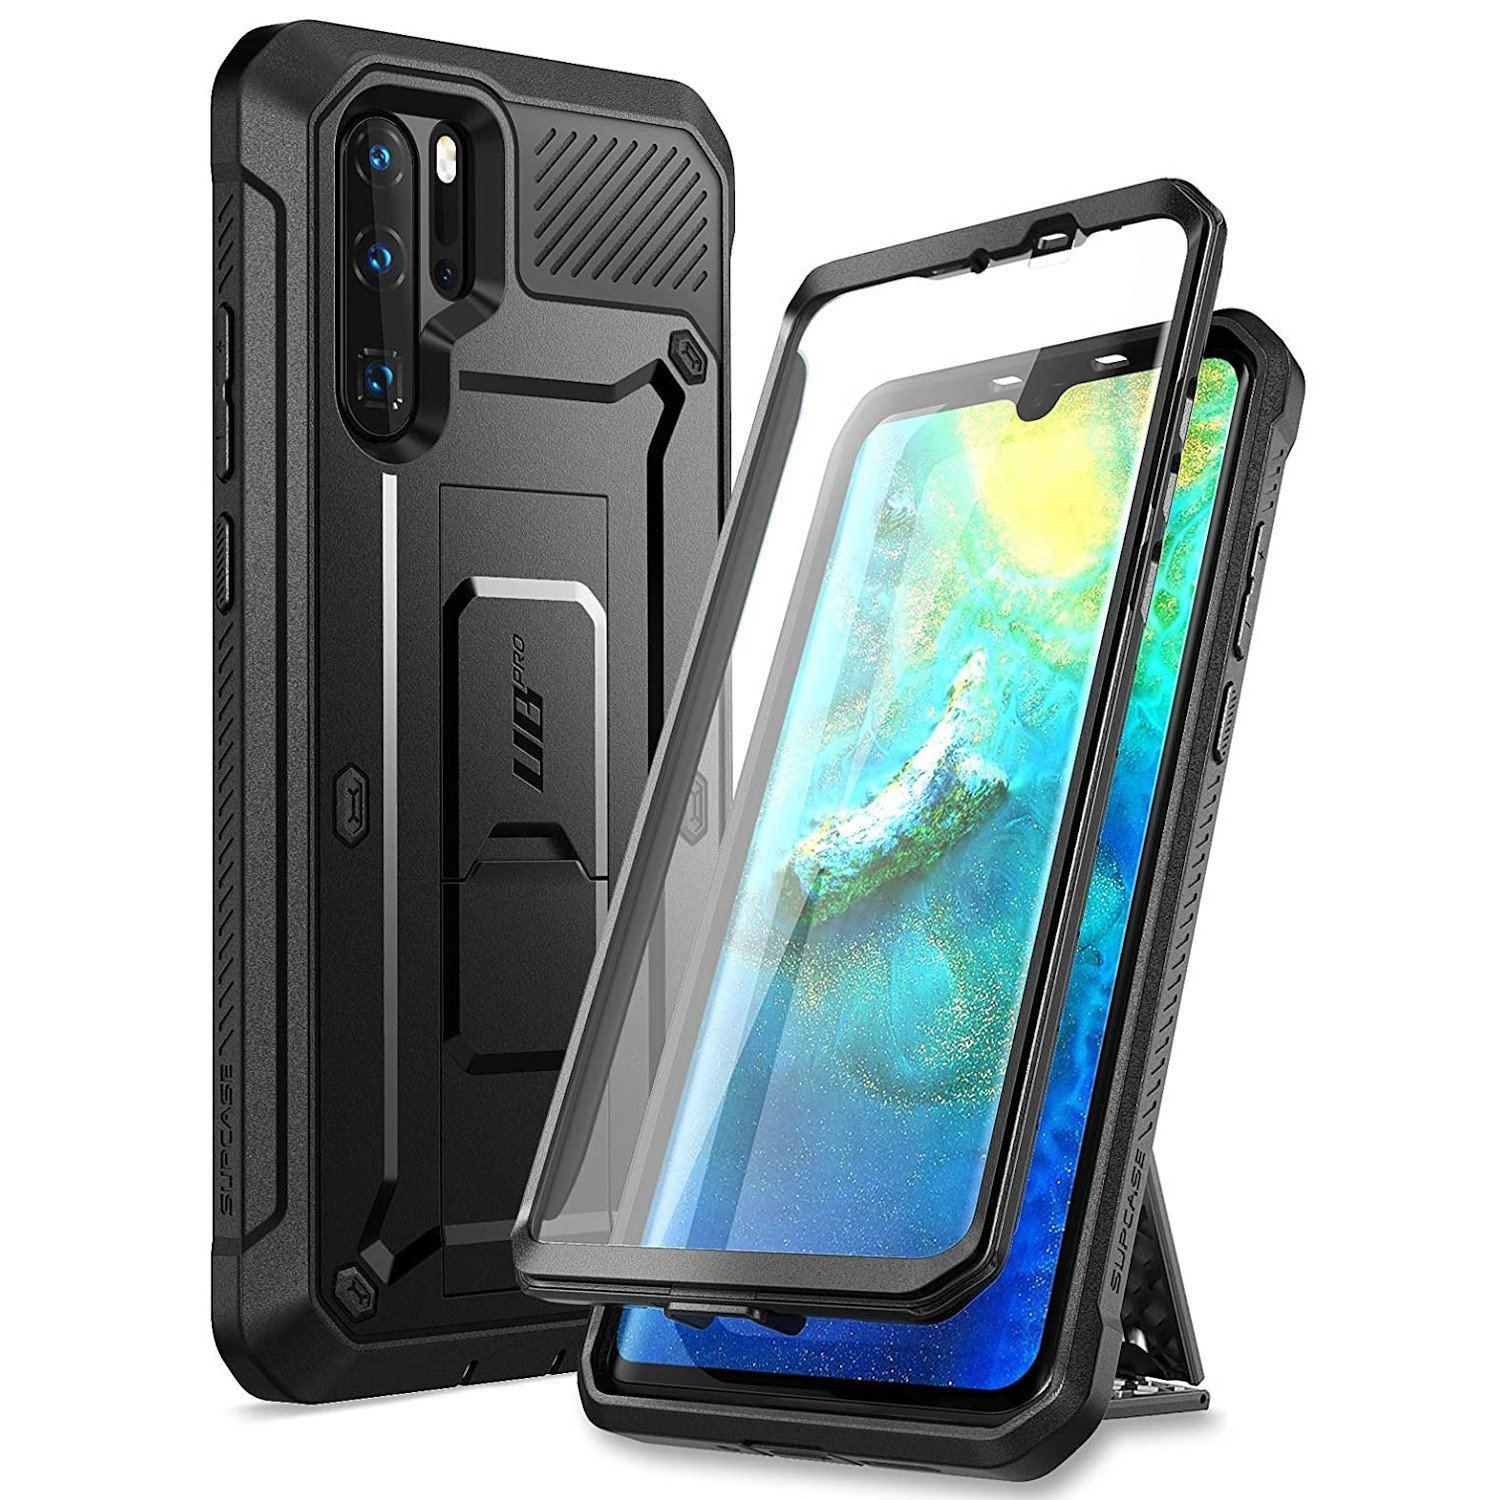 Supcase UB Pro Series Full-Body Rugged Holster Case for Huawei P30 Pro(With Build-in Screen Protector), Black Huawei Case Supcase Black 